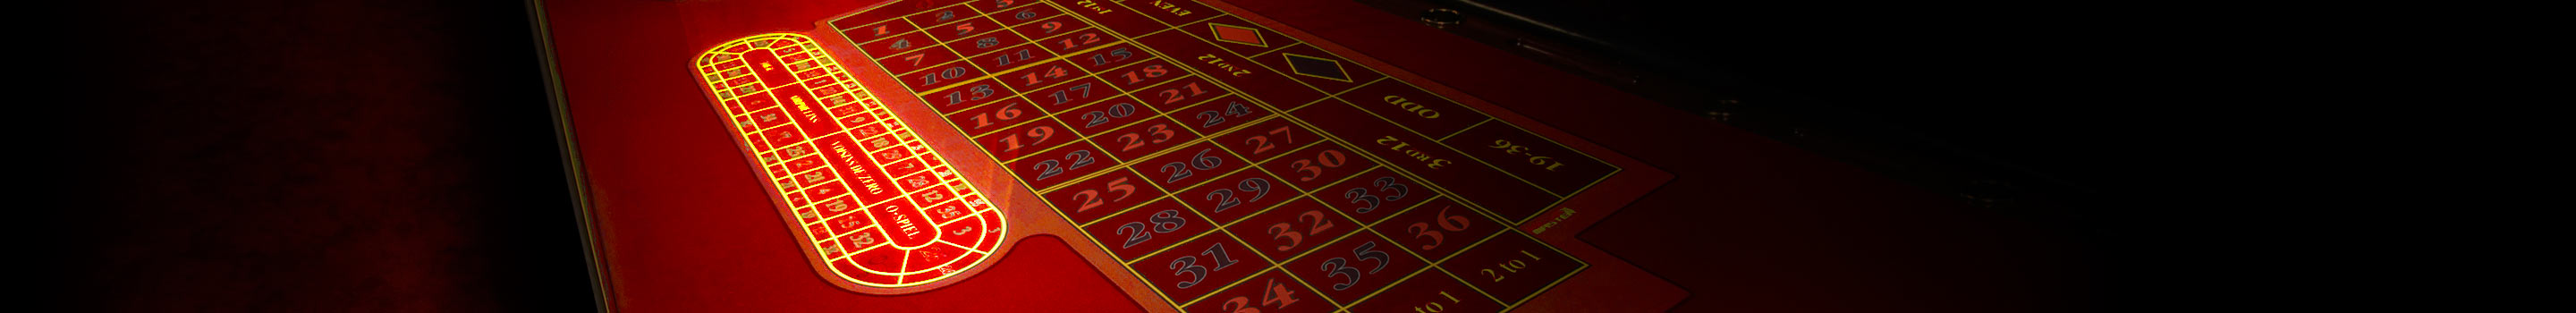 Special bets on the racetrack in roulette